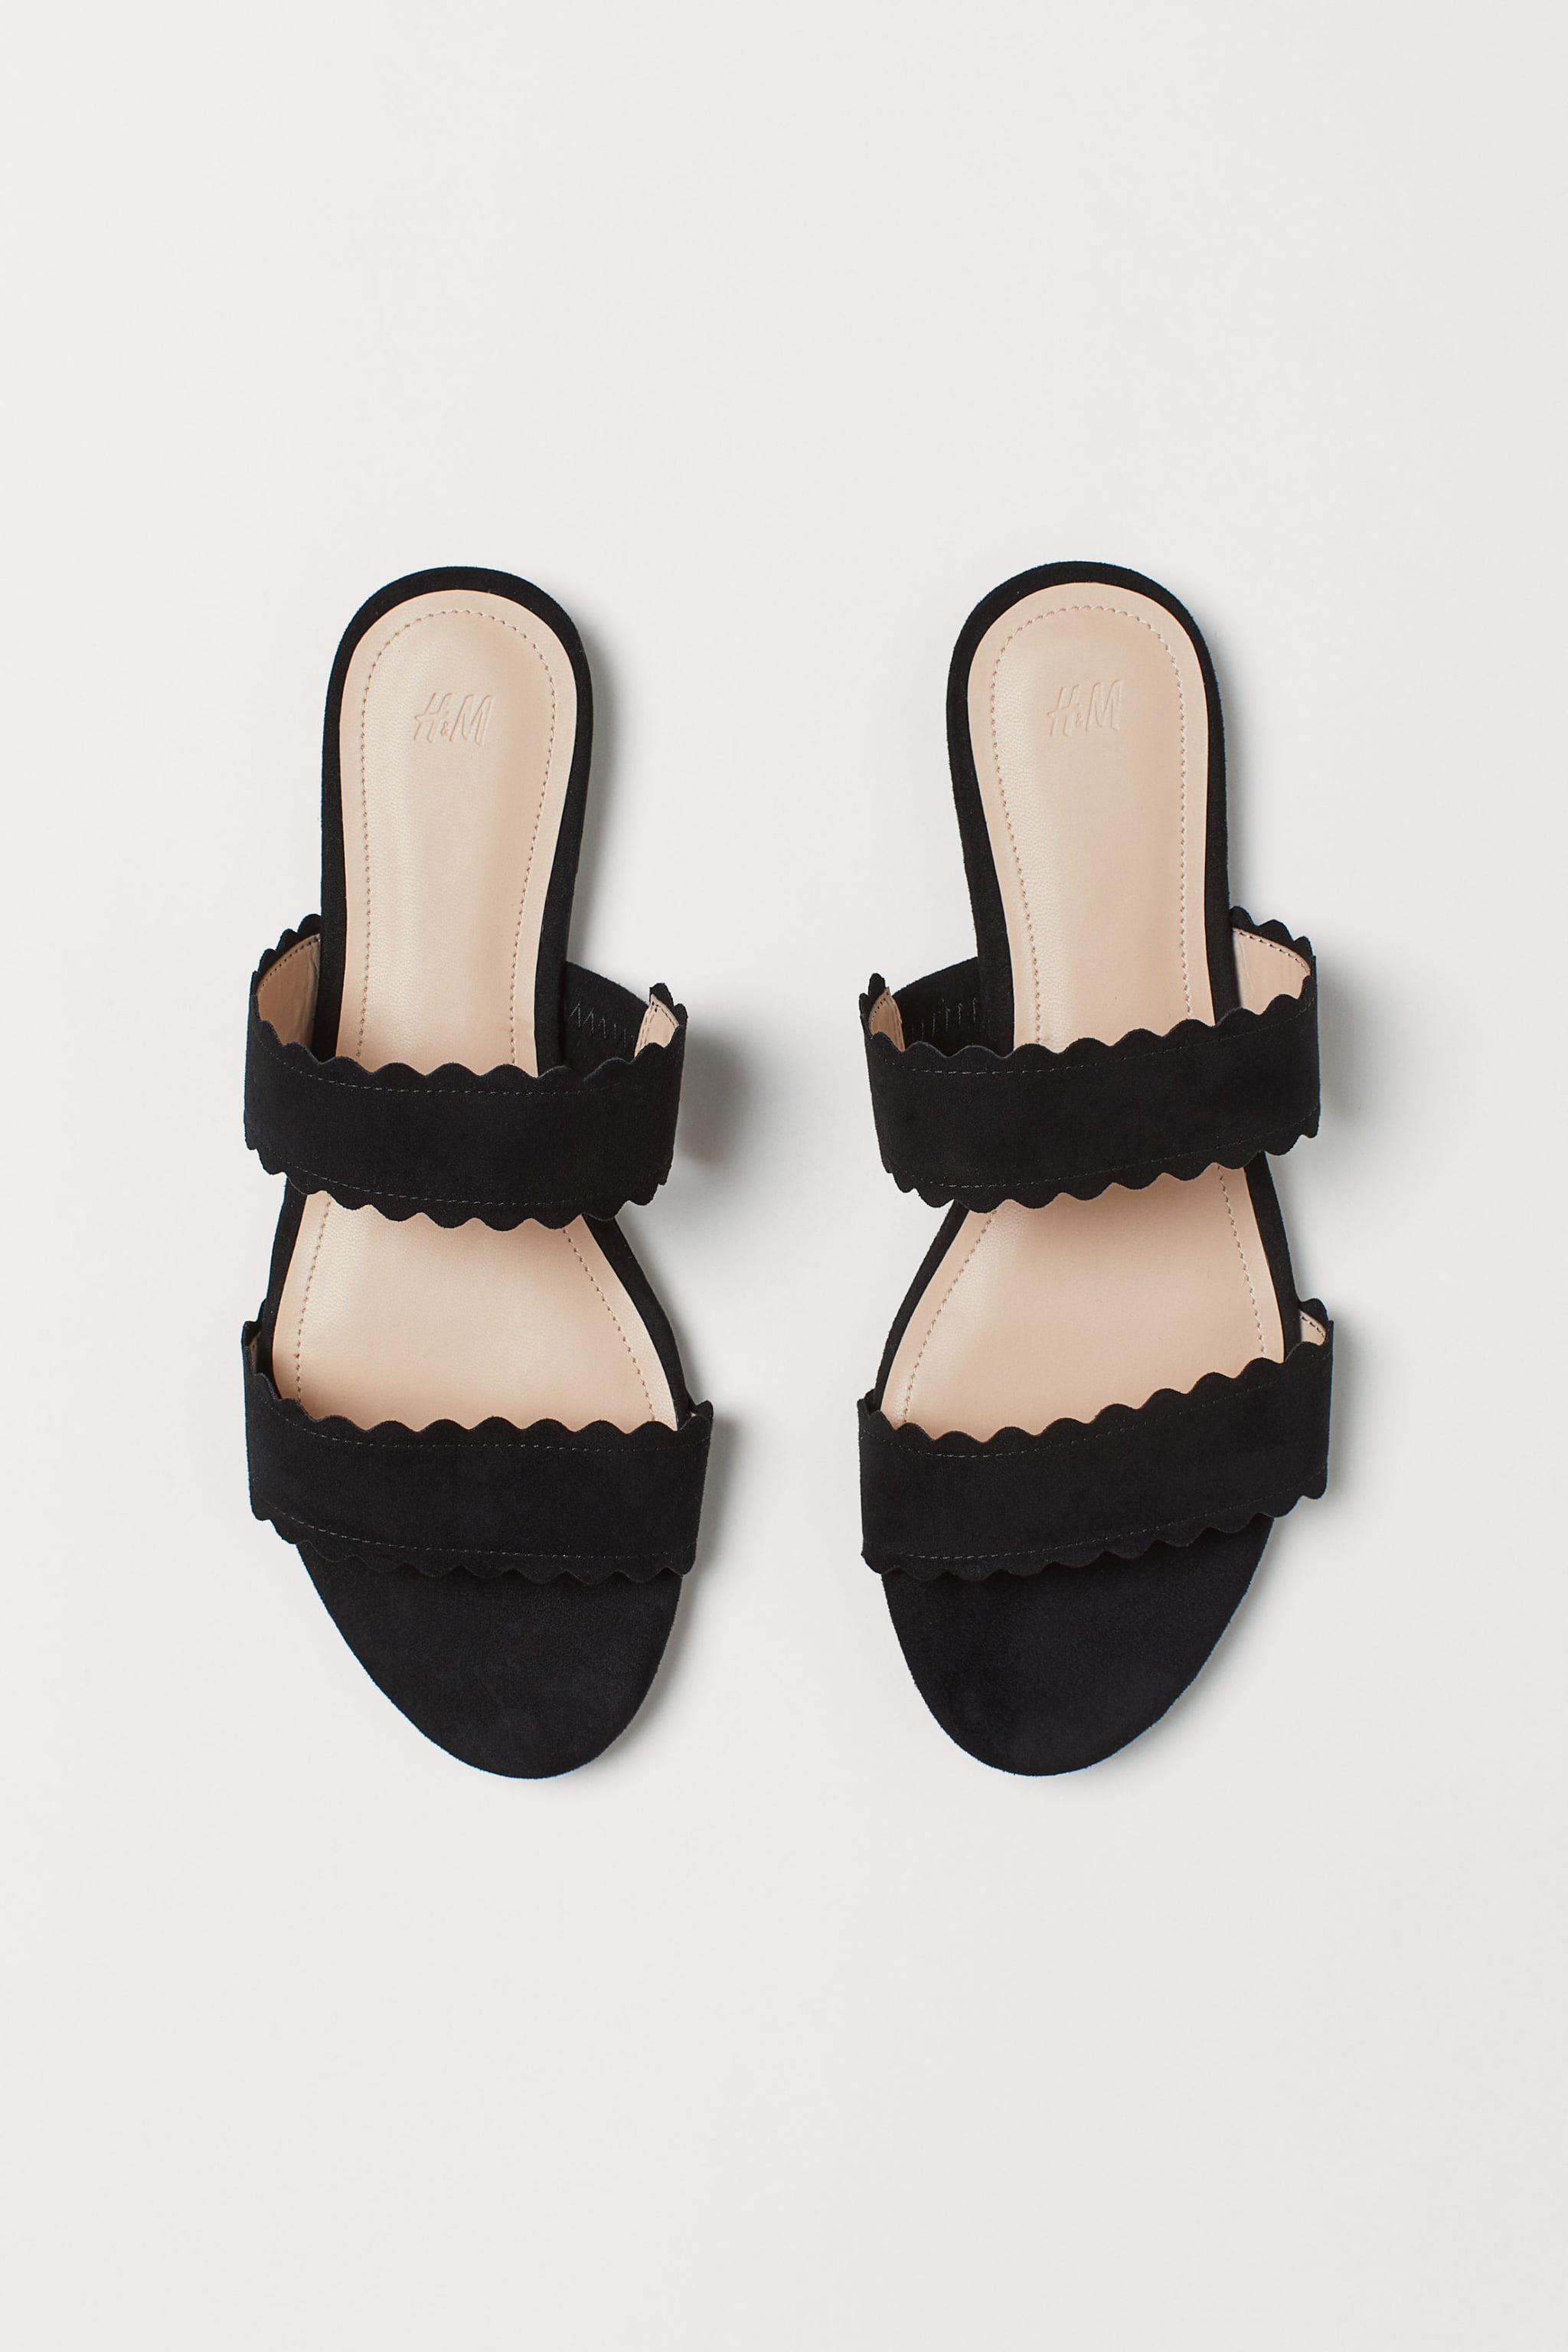 H&M Black Sandals | These 23 Versatile Black Are All This Summer | Fashion Photo 2